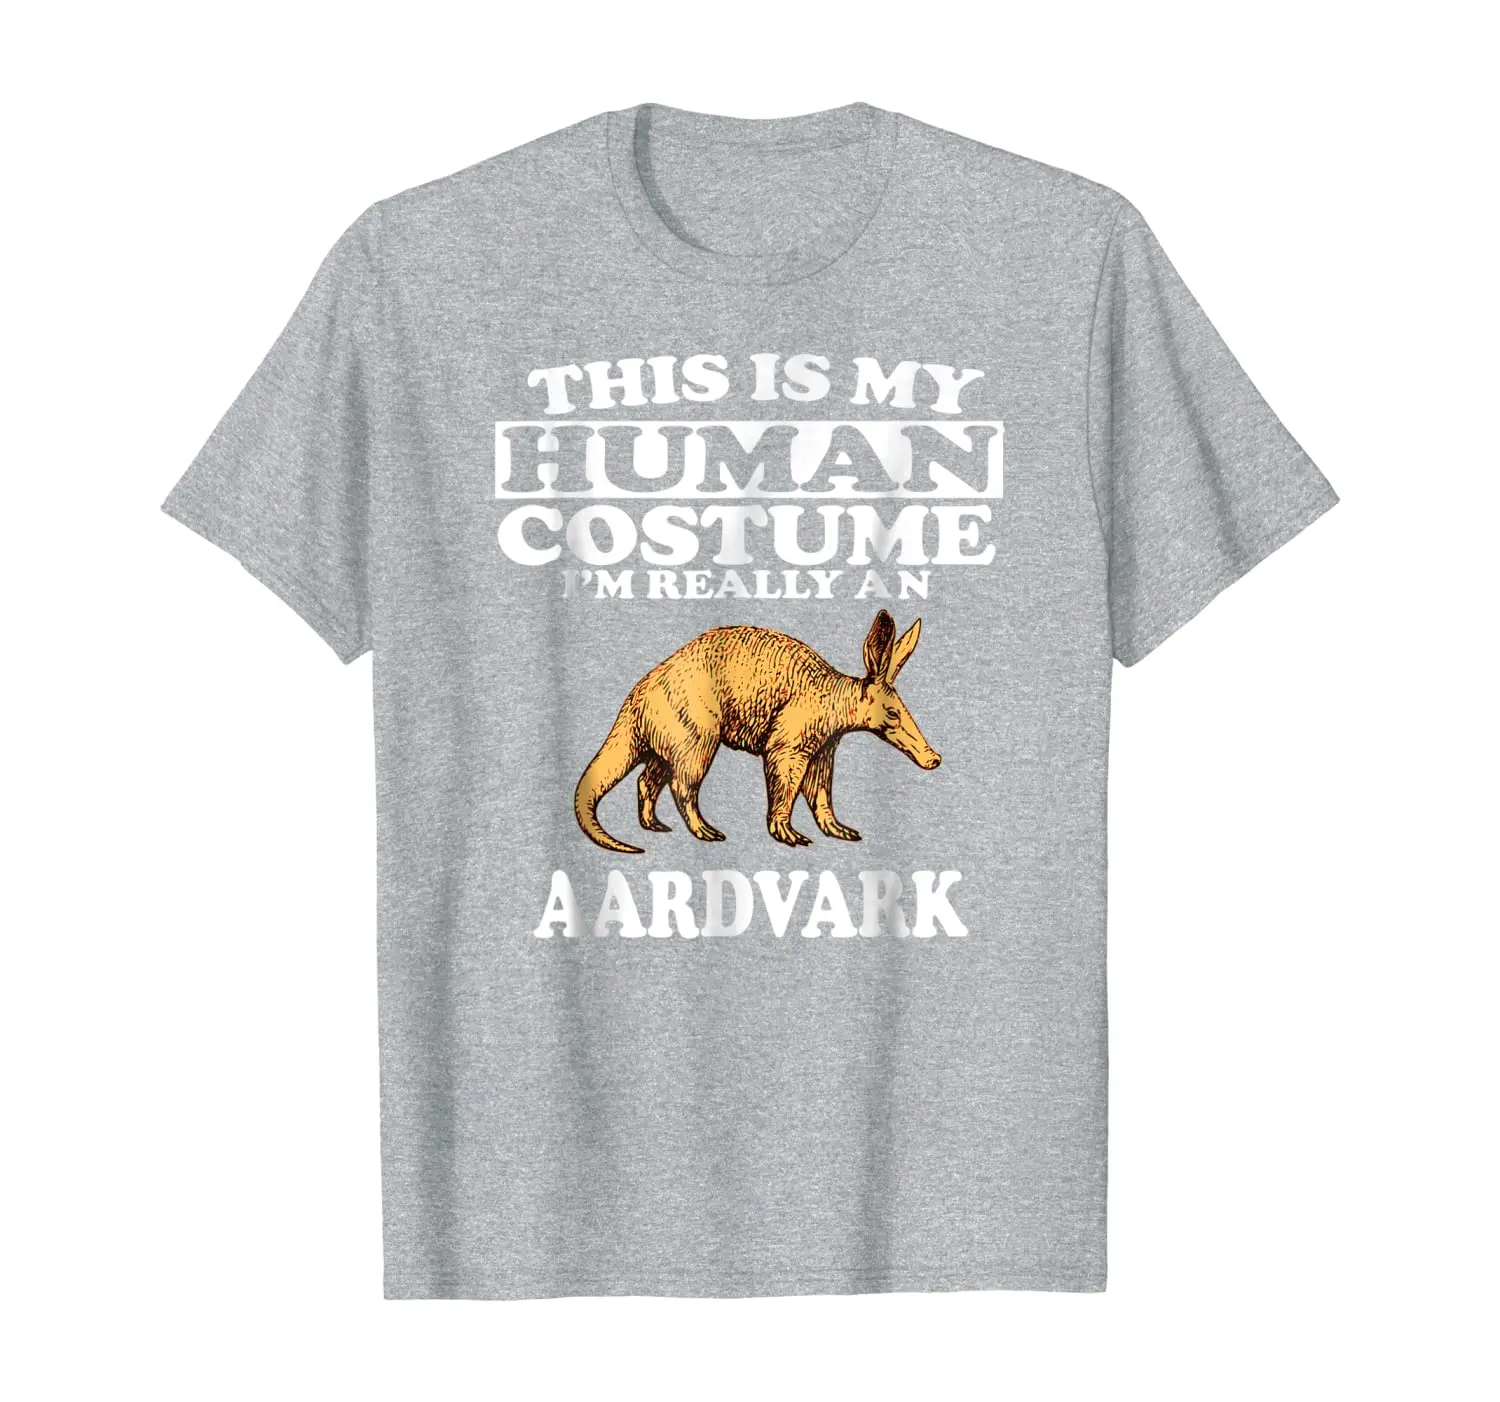 This Is My Human Costume I'm Really An Aardvark T-Shirt this is my circus and these are my monkeys t shirt pink